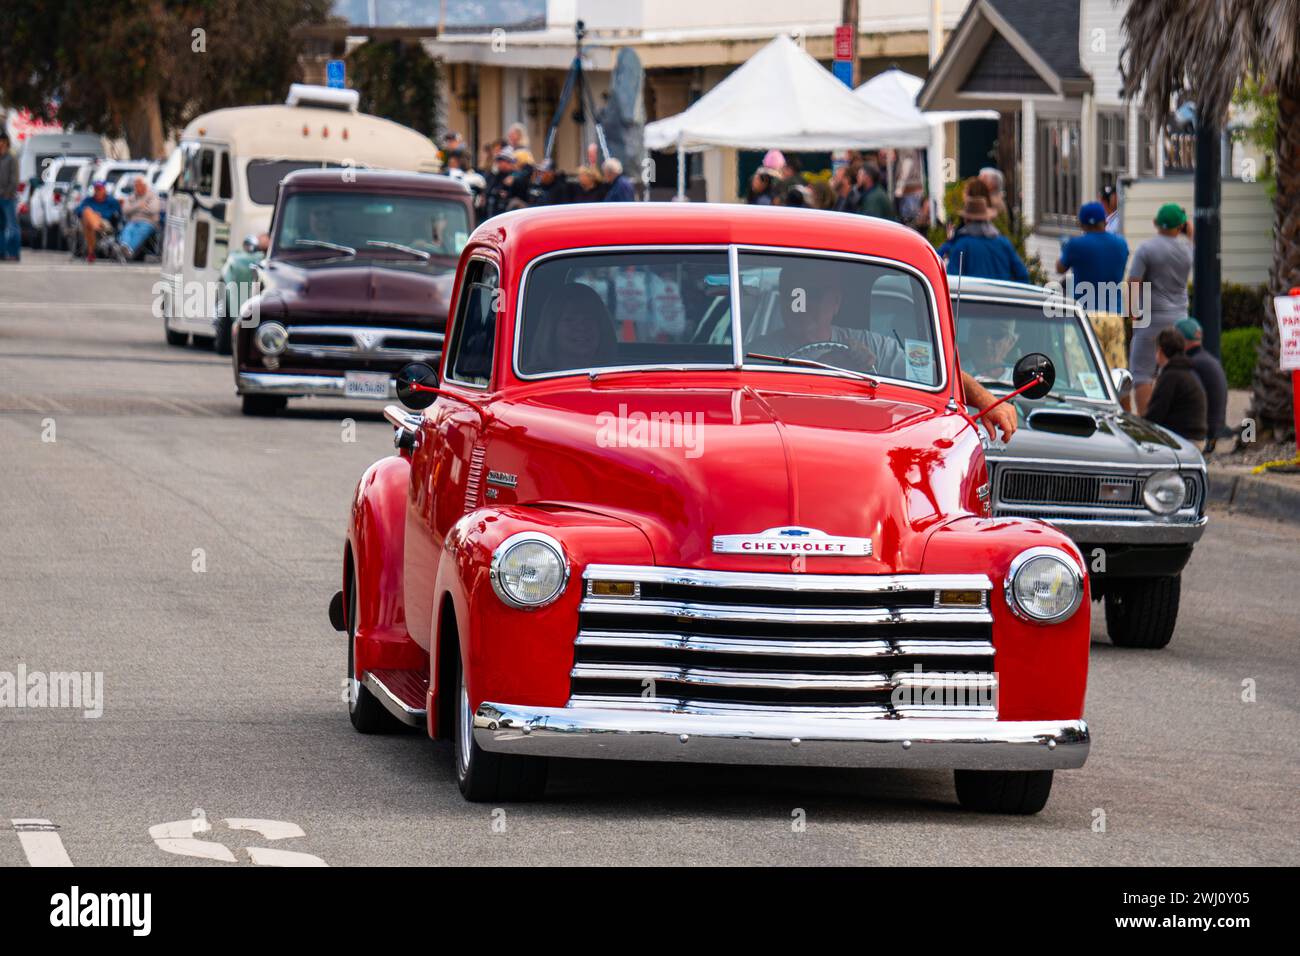 A red classic Chevrolet 3100 pick up truck from the 1950s based hot rod in Morro Bay California in May of 2023, at  the 'Cruisin’ Morro Bay Car Show' Stock Photo